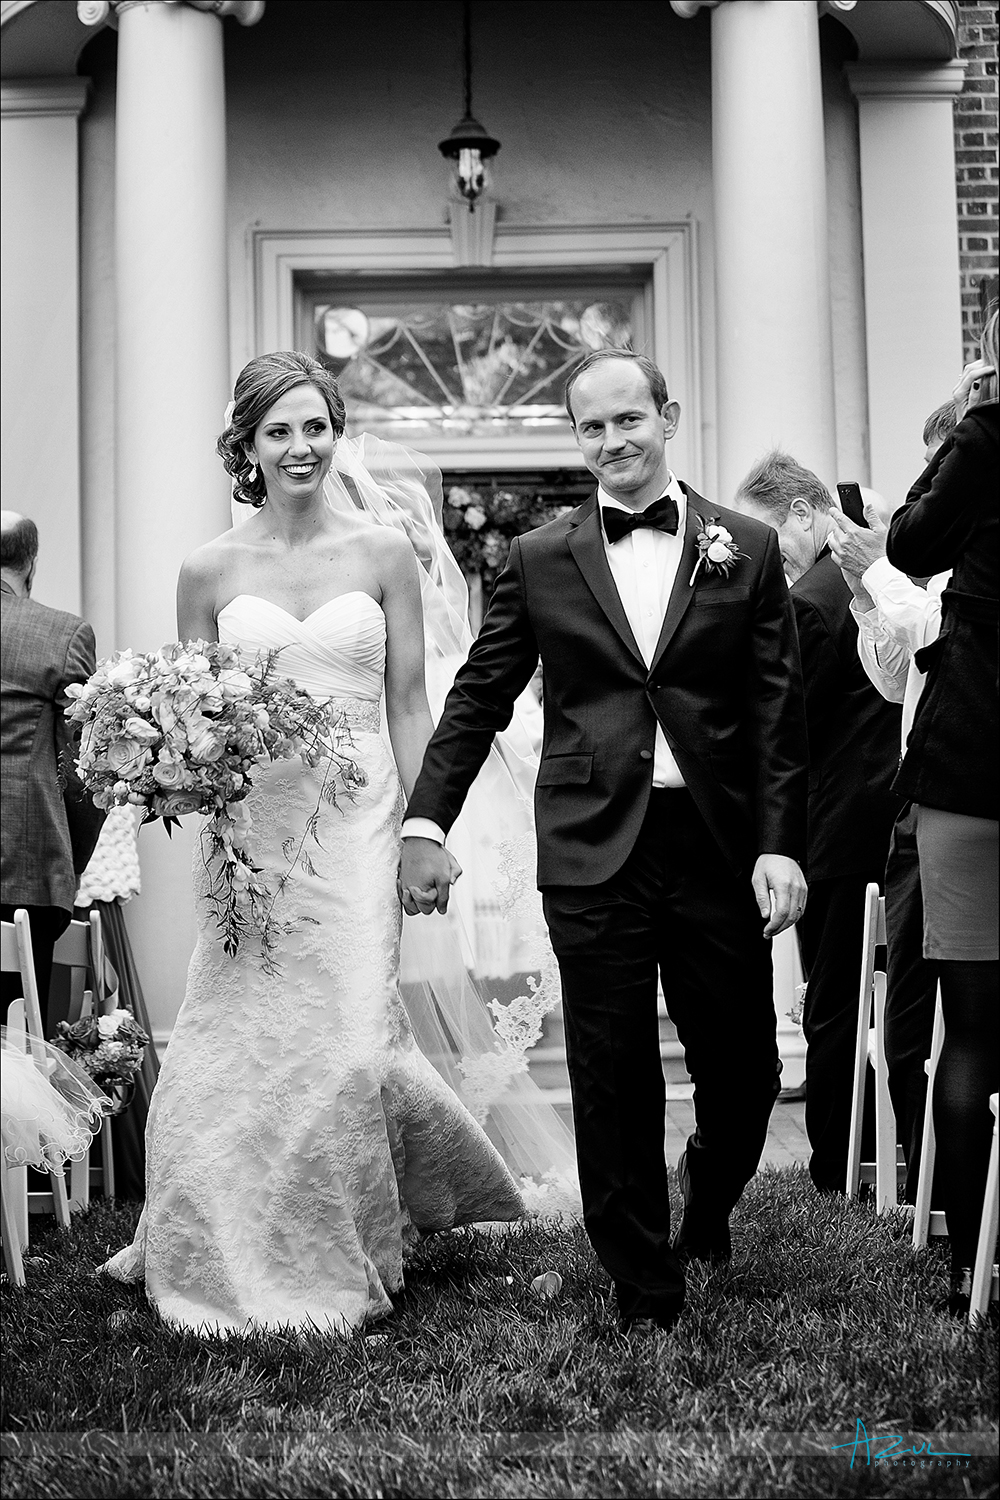 Husband and wife walking down the aisle after wedding in Chapel Hill NC